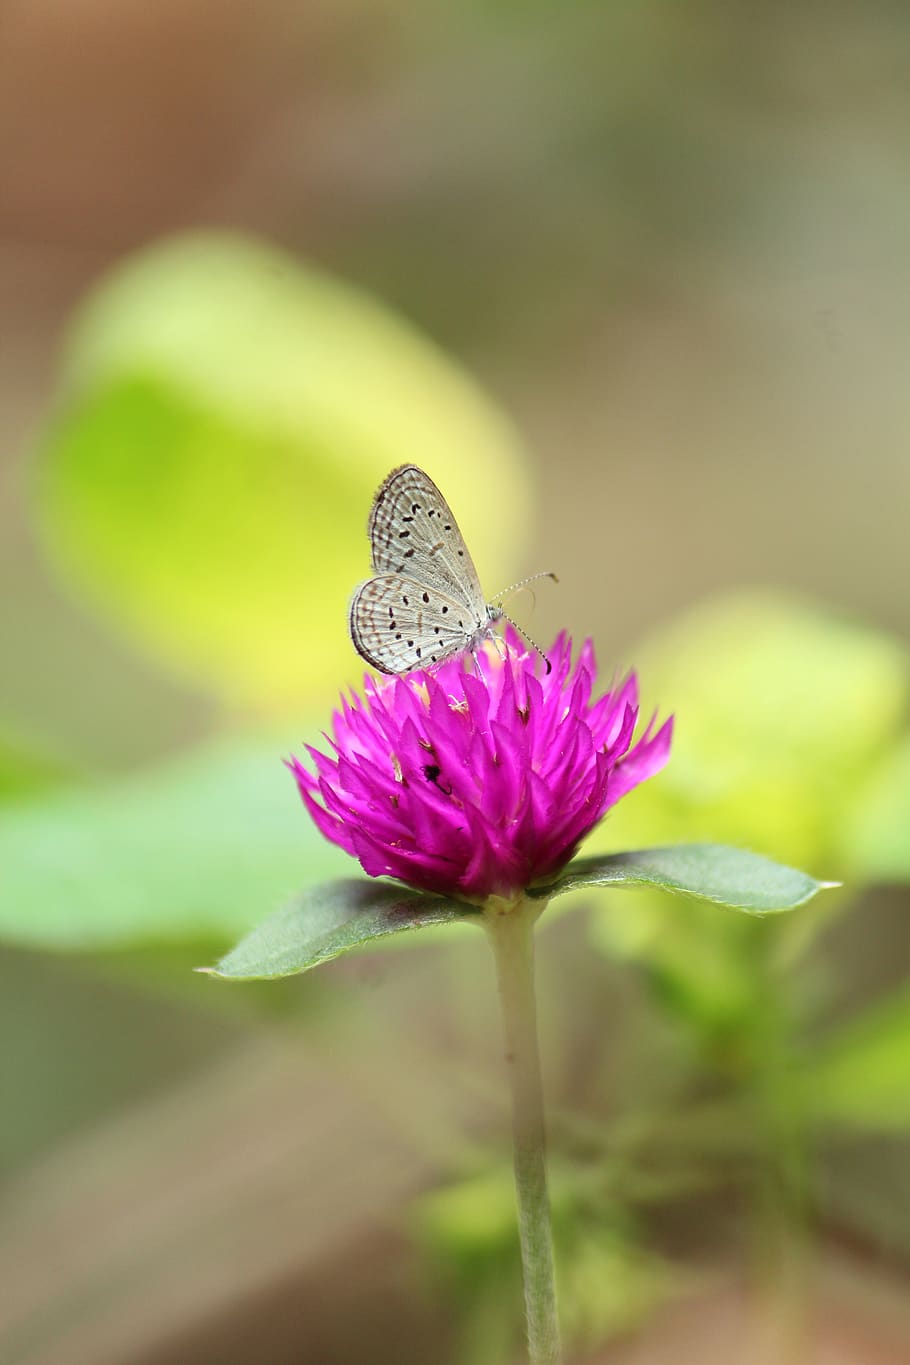 Hd Wallpaper Nature Insect Butterfly Outdoors Flower Summer